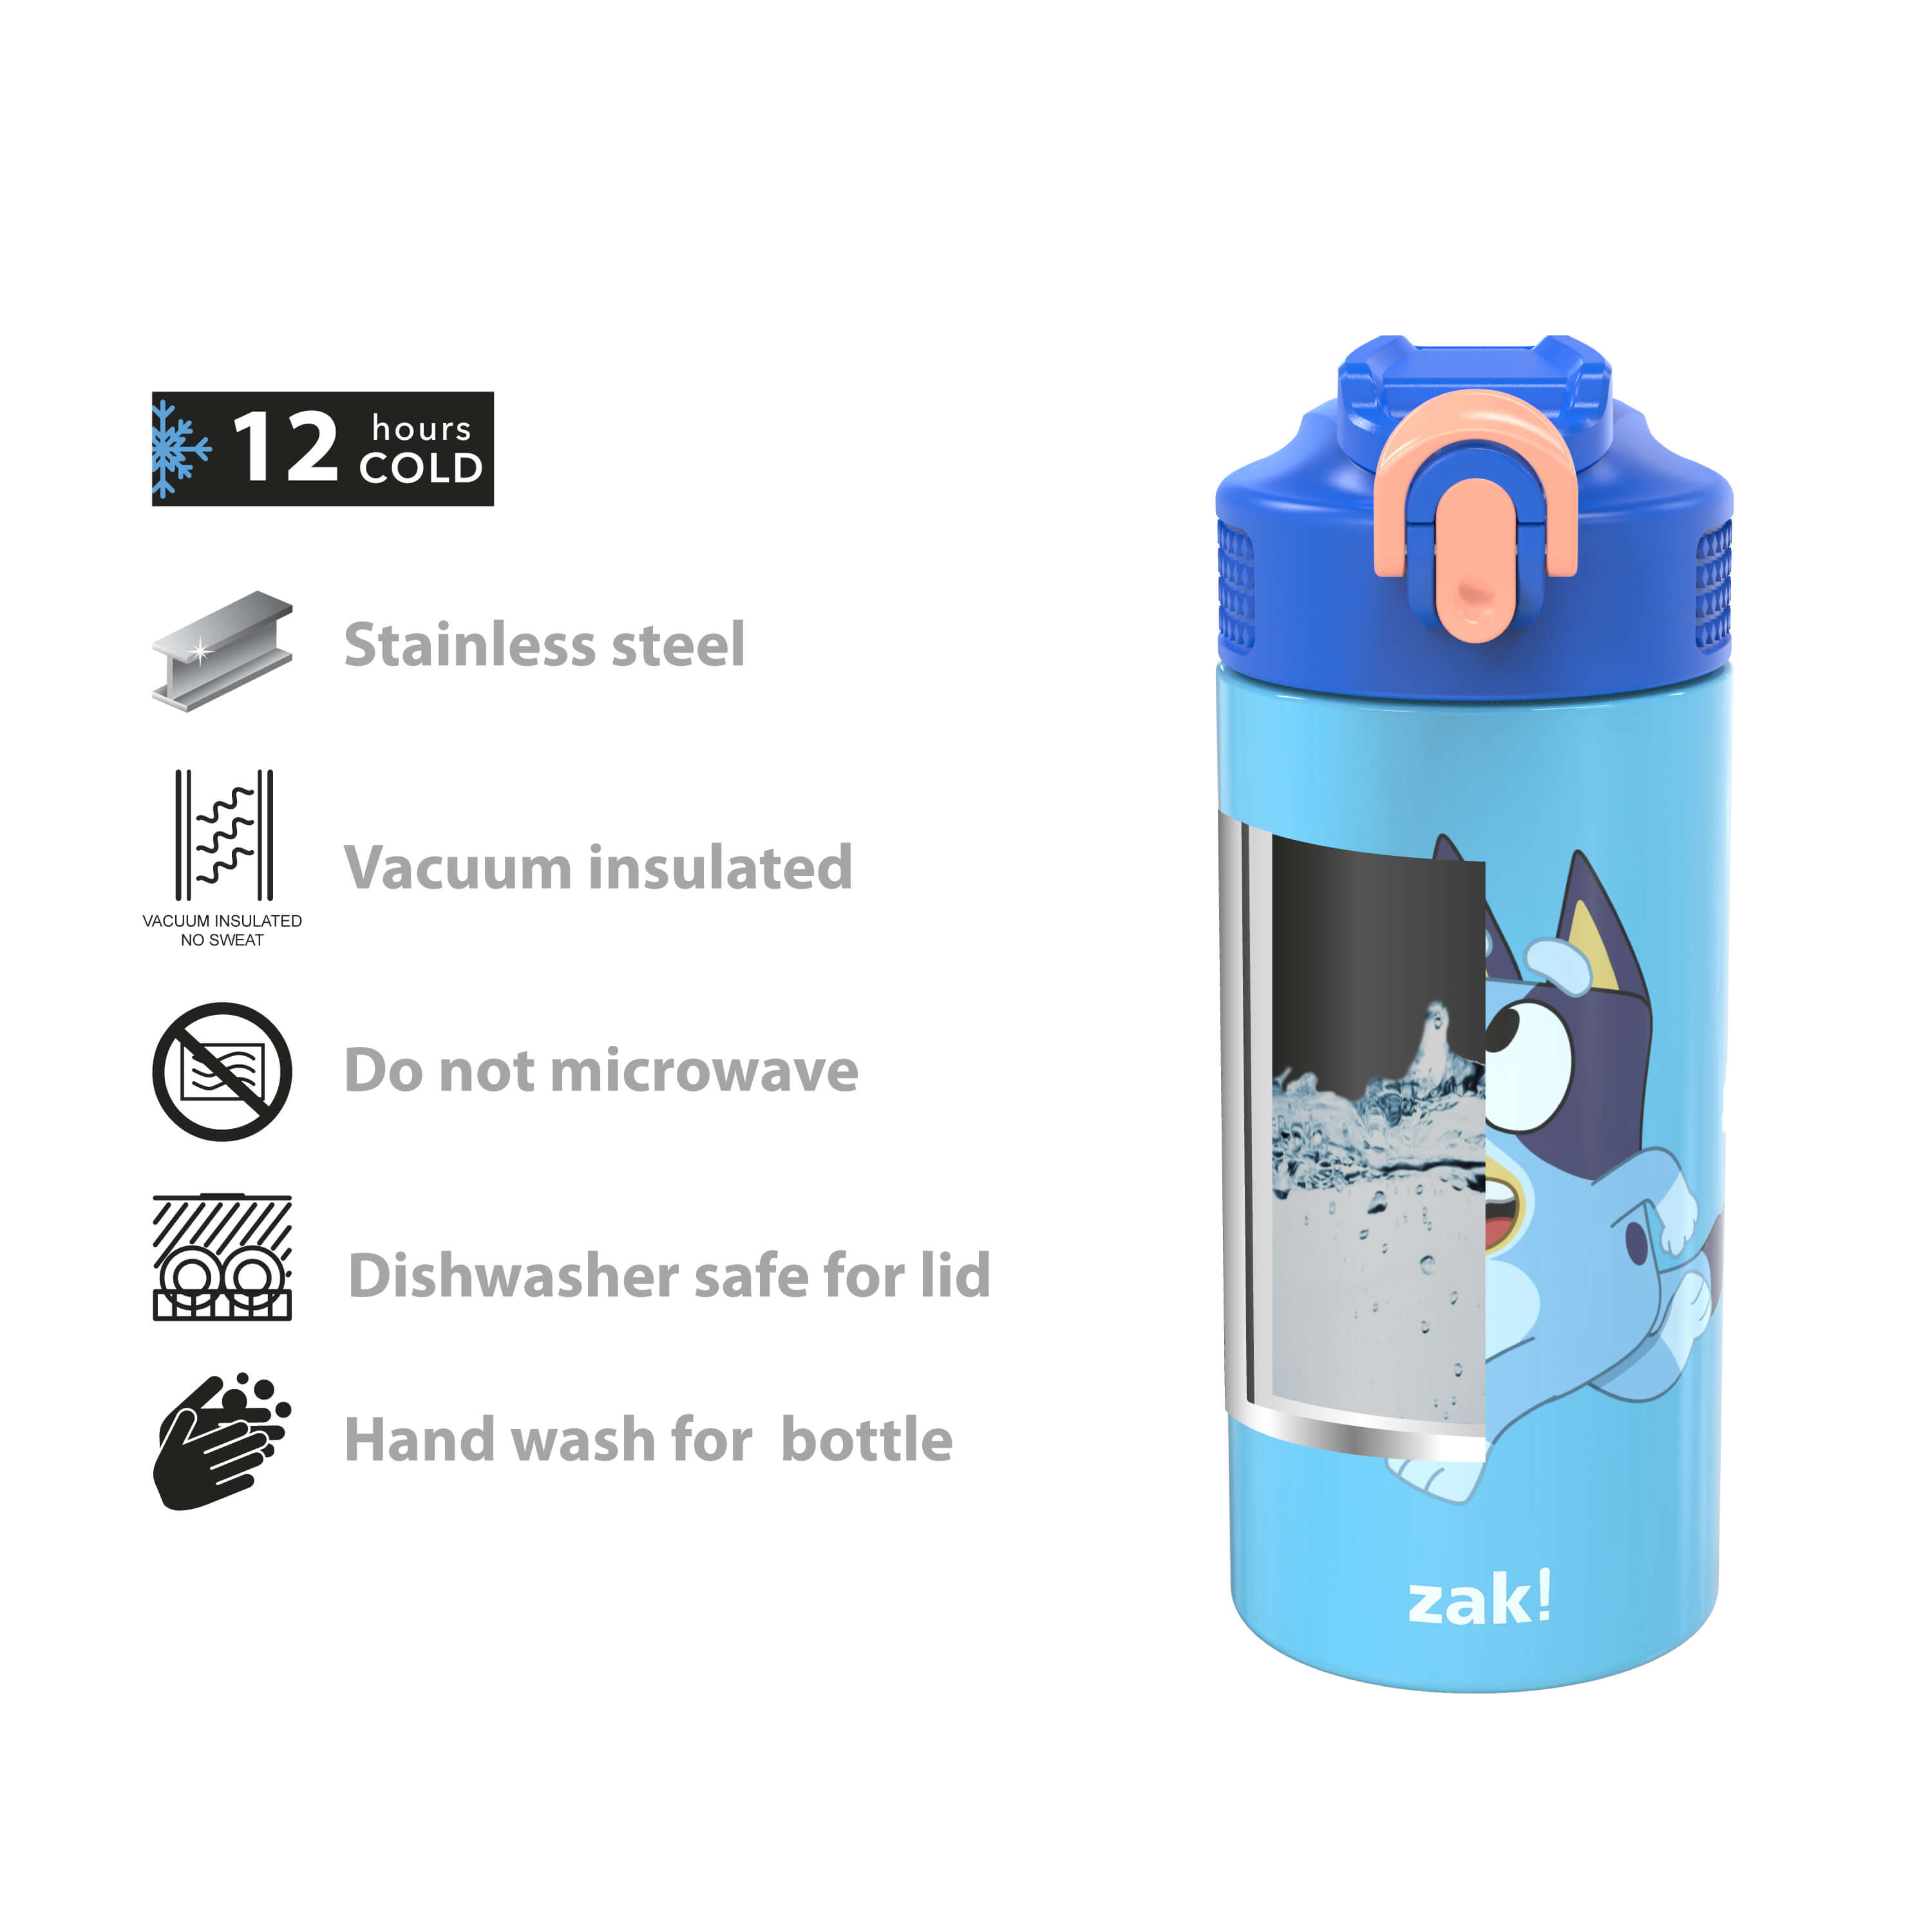 Bluey-Inspired Stainless Steel Water Bottle with Shaun's 'Mah!